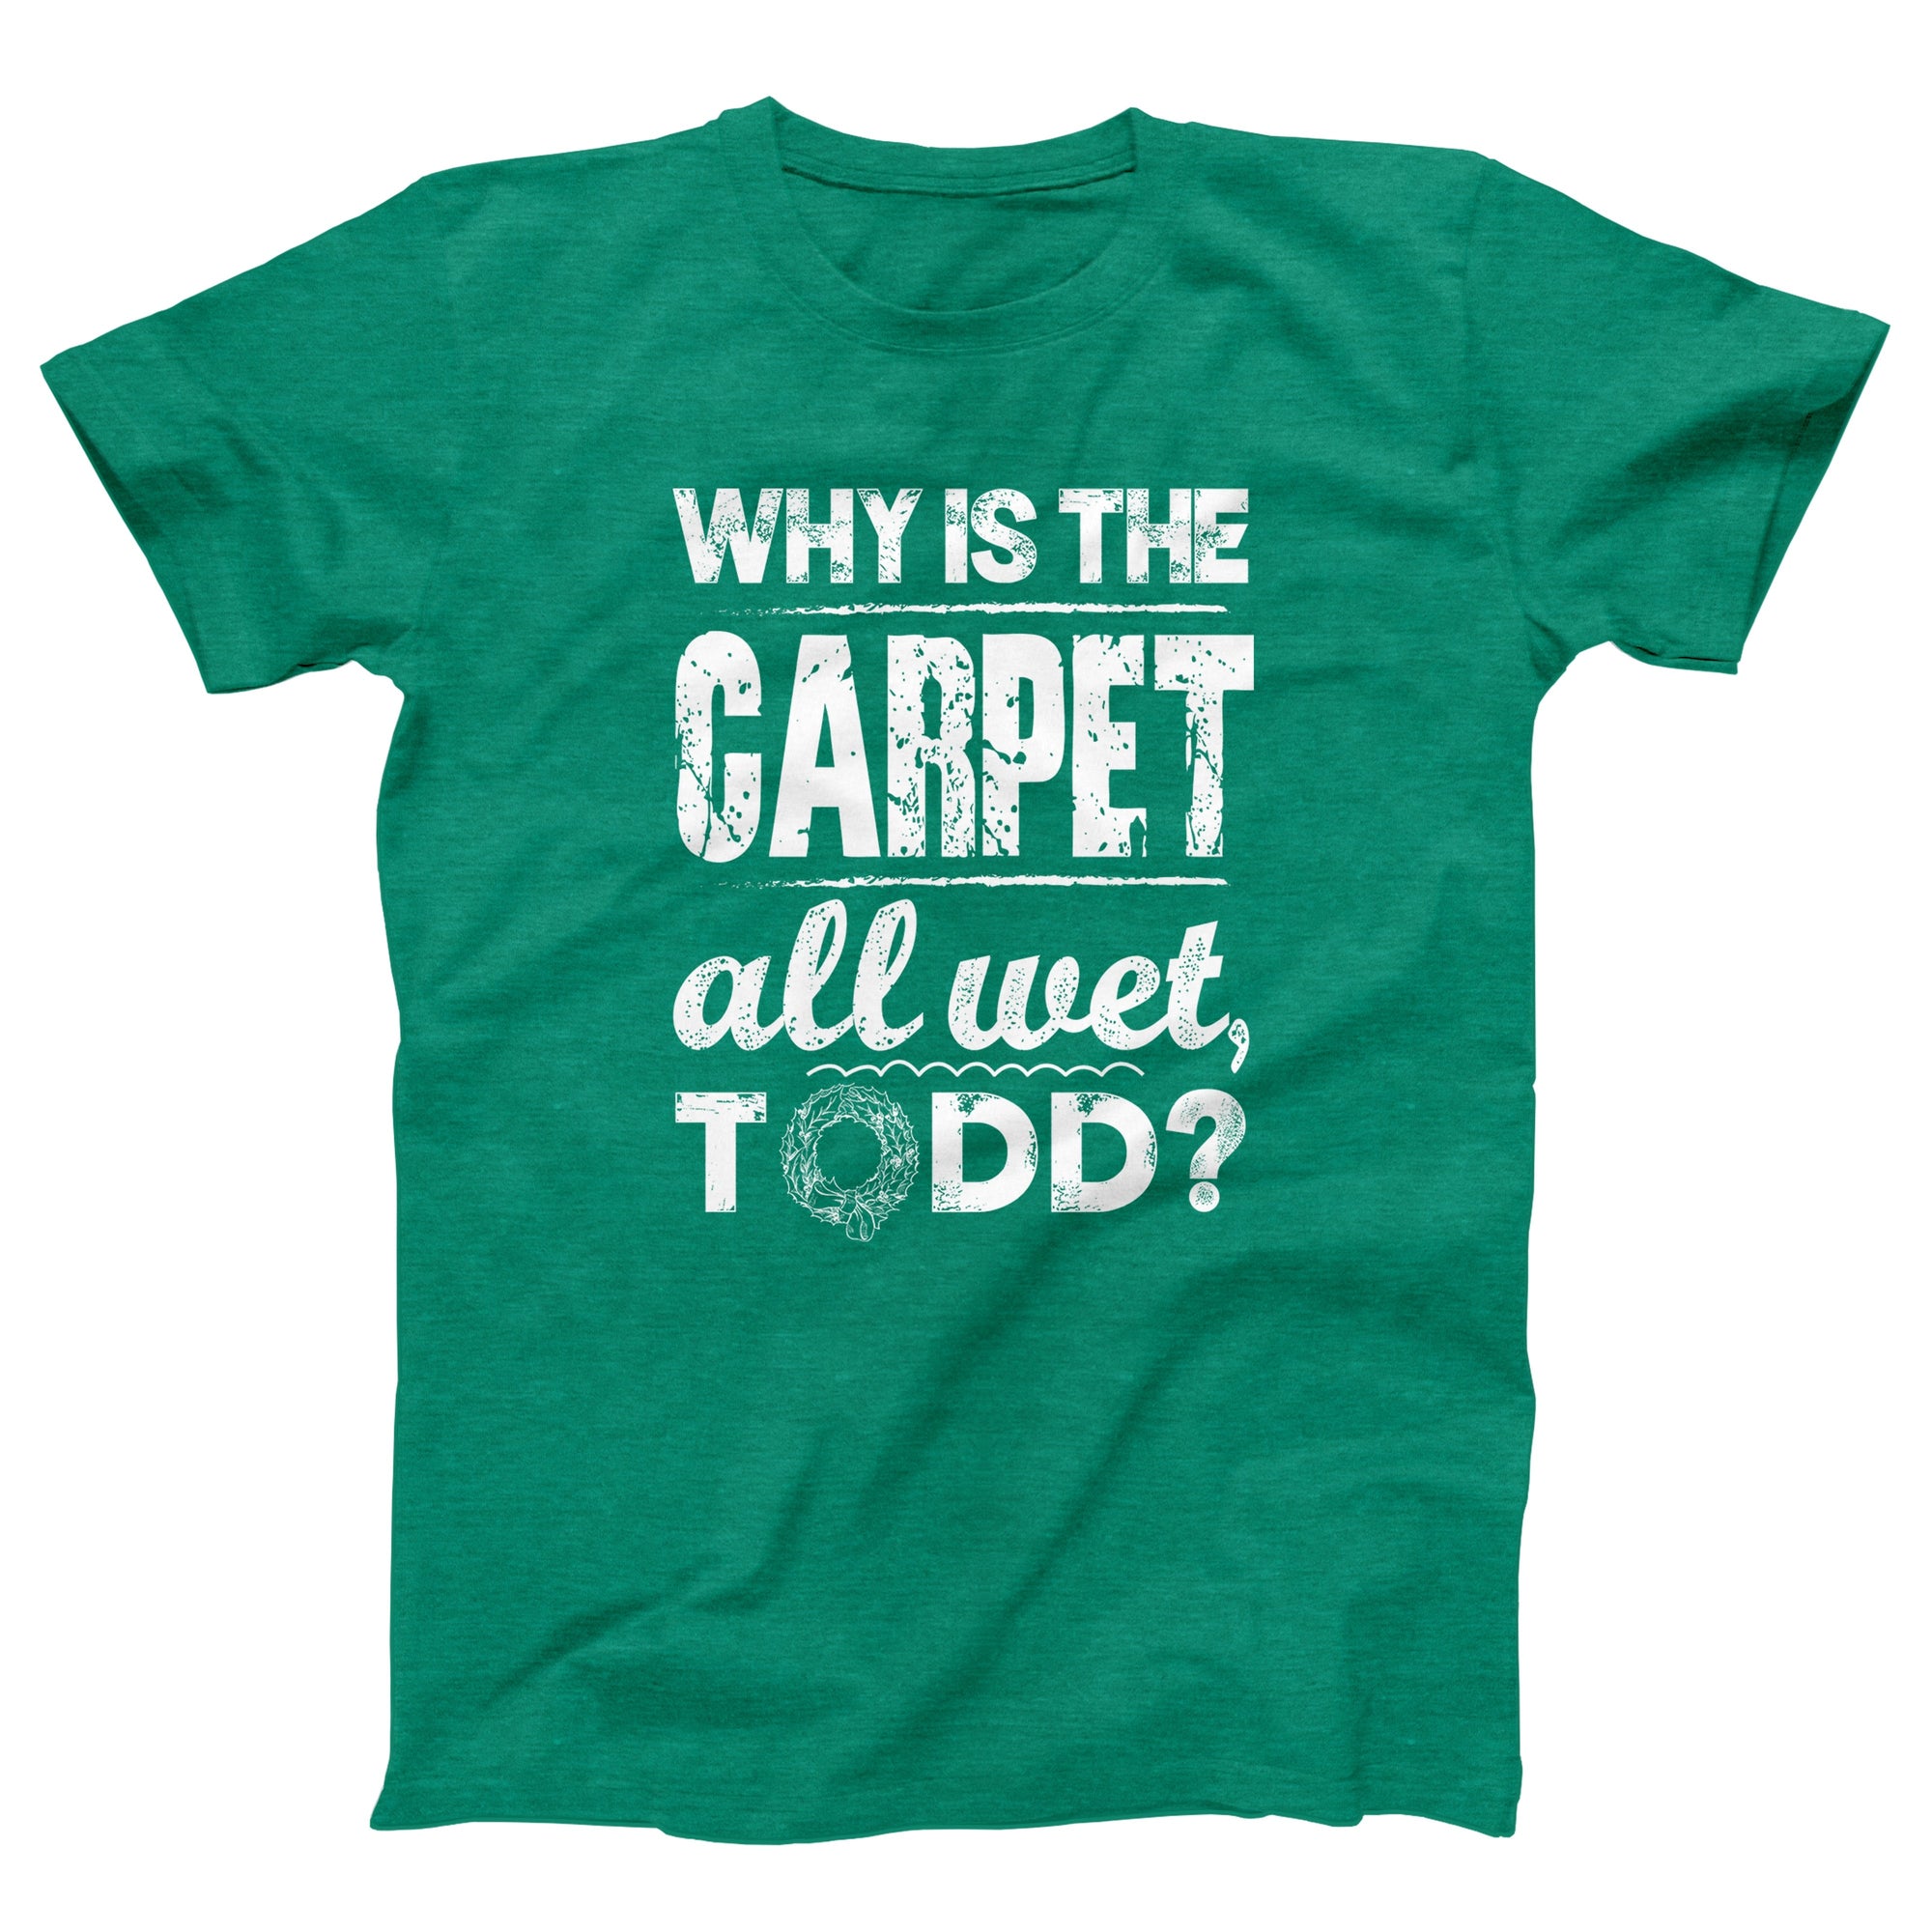 Why Is The Carpet All Wet Todd Adult Unisex T-Shirt - Twisted Gorilla